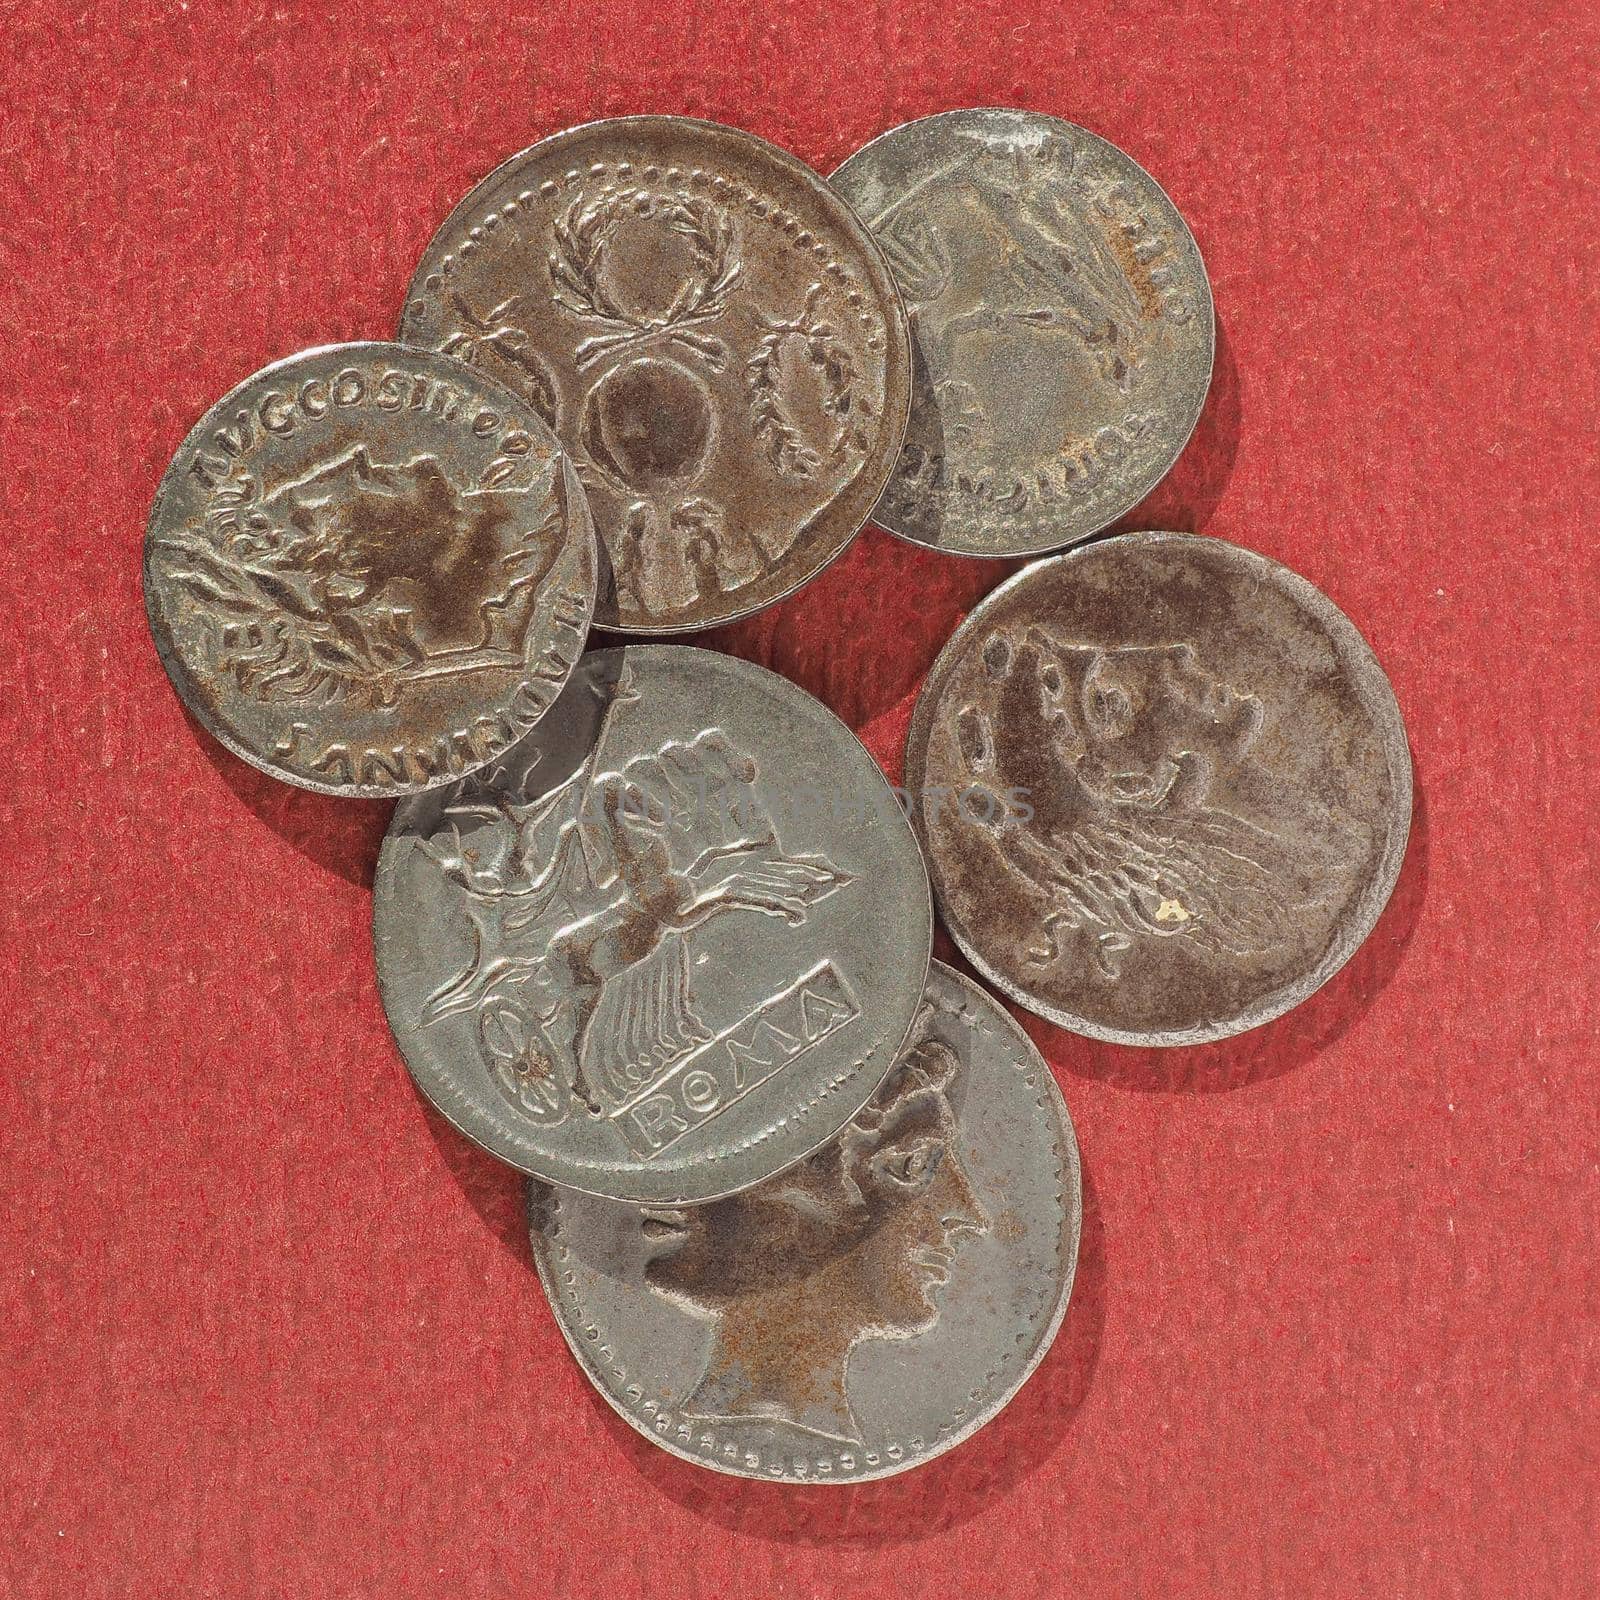 Ancient Roman coins over a red background